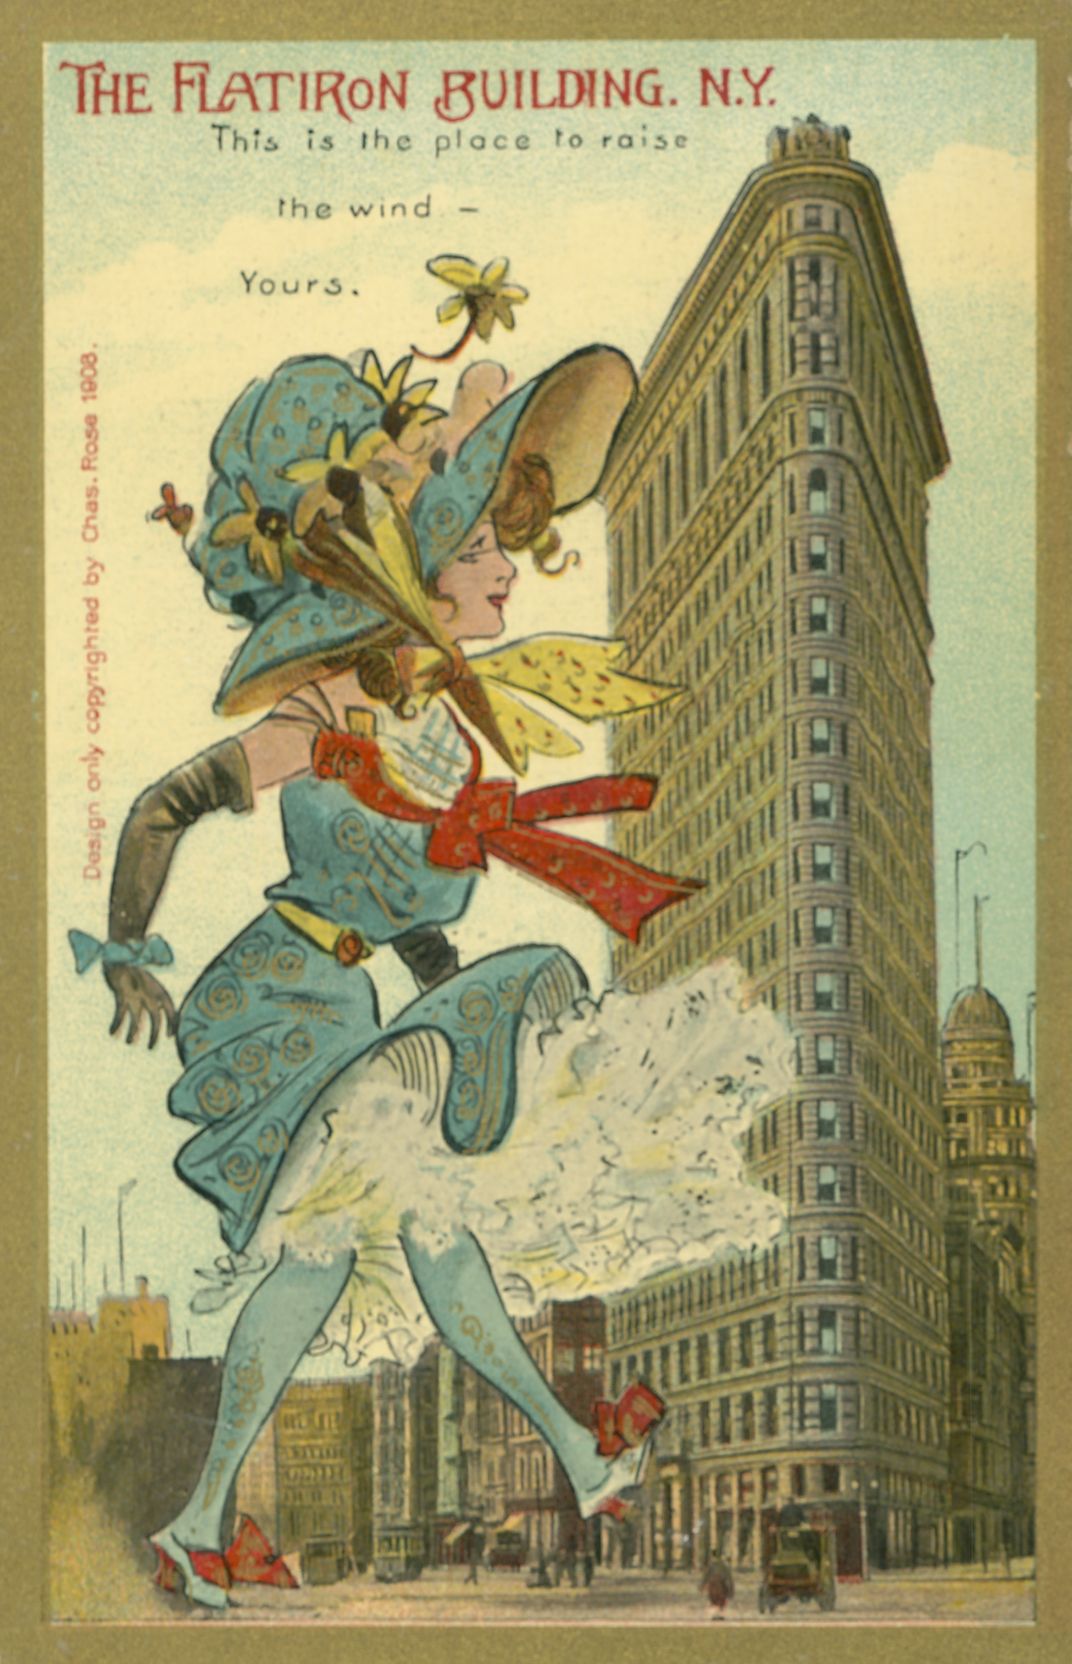 A postcard featuring the Flatiron Building from 1908